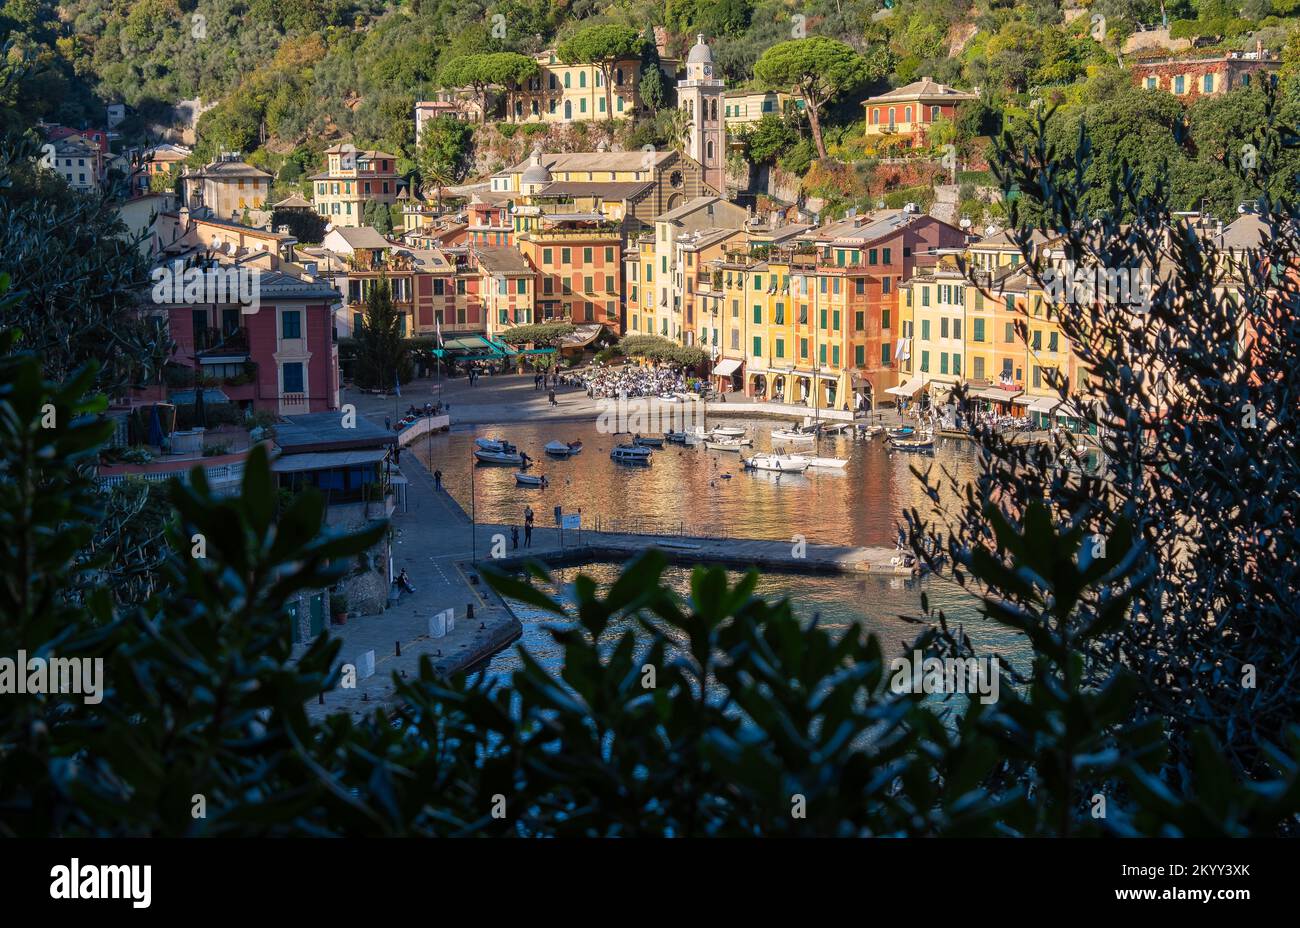 Beautiful bay with colorful houses - Portofino luxury travel destination. Village, yachts and boats in little marina. Liguria, Italy A vacation resort Stock Photo